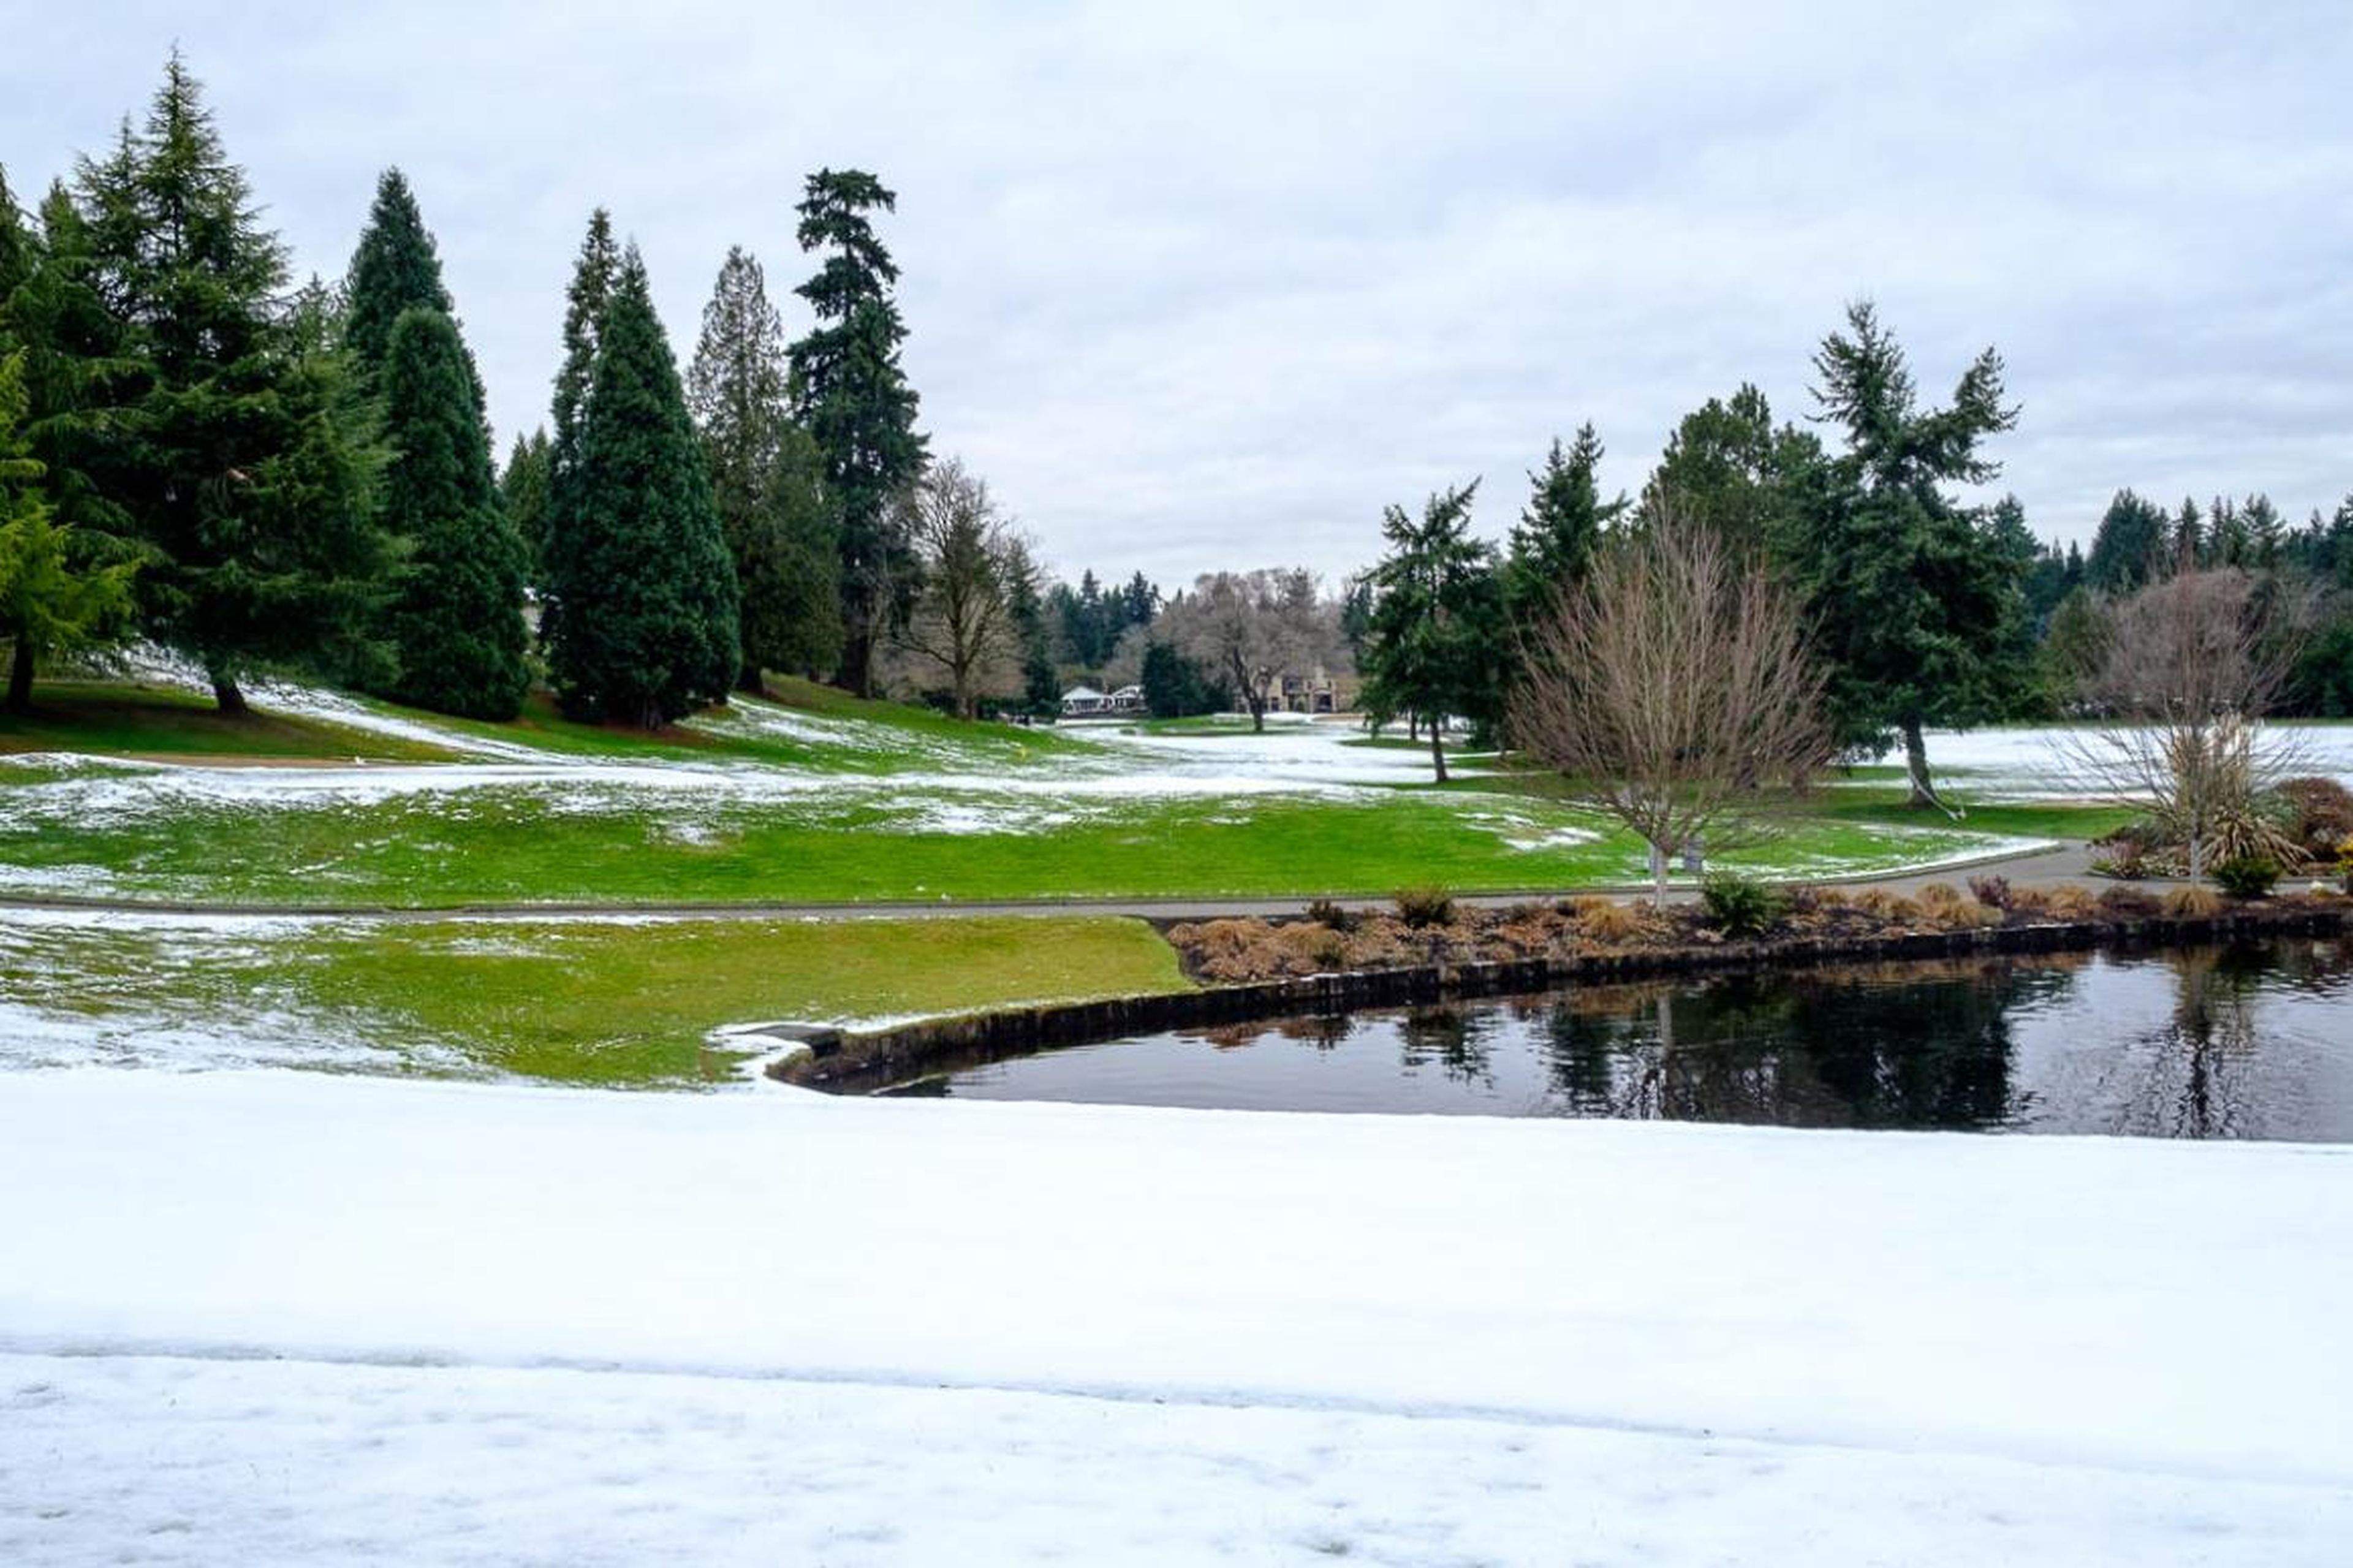 The Overlake Country Club in Medina has been open since 1927. Membership to the club is only by invitation.